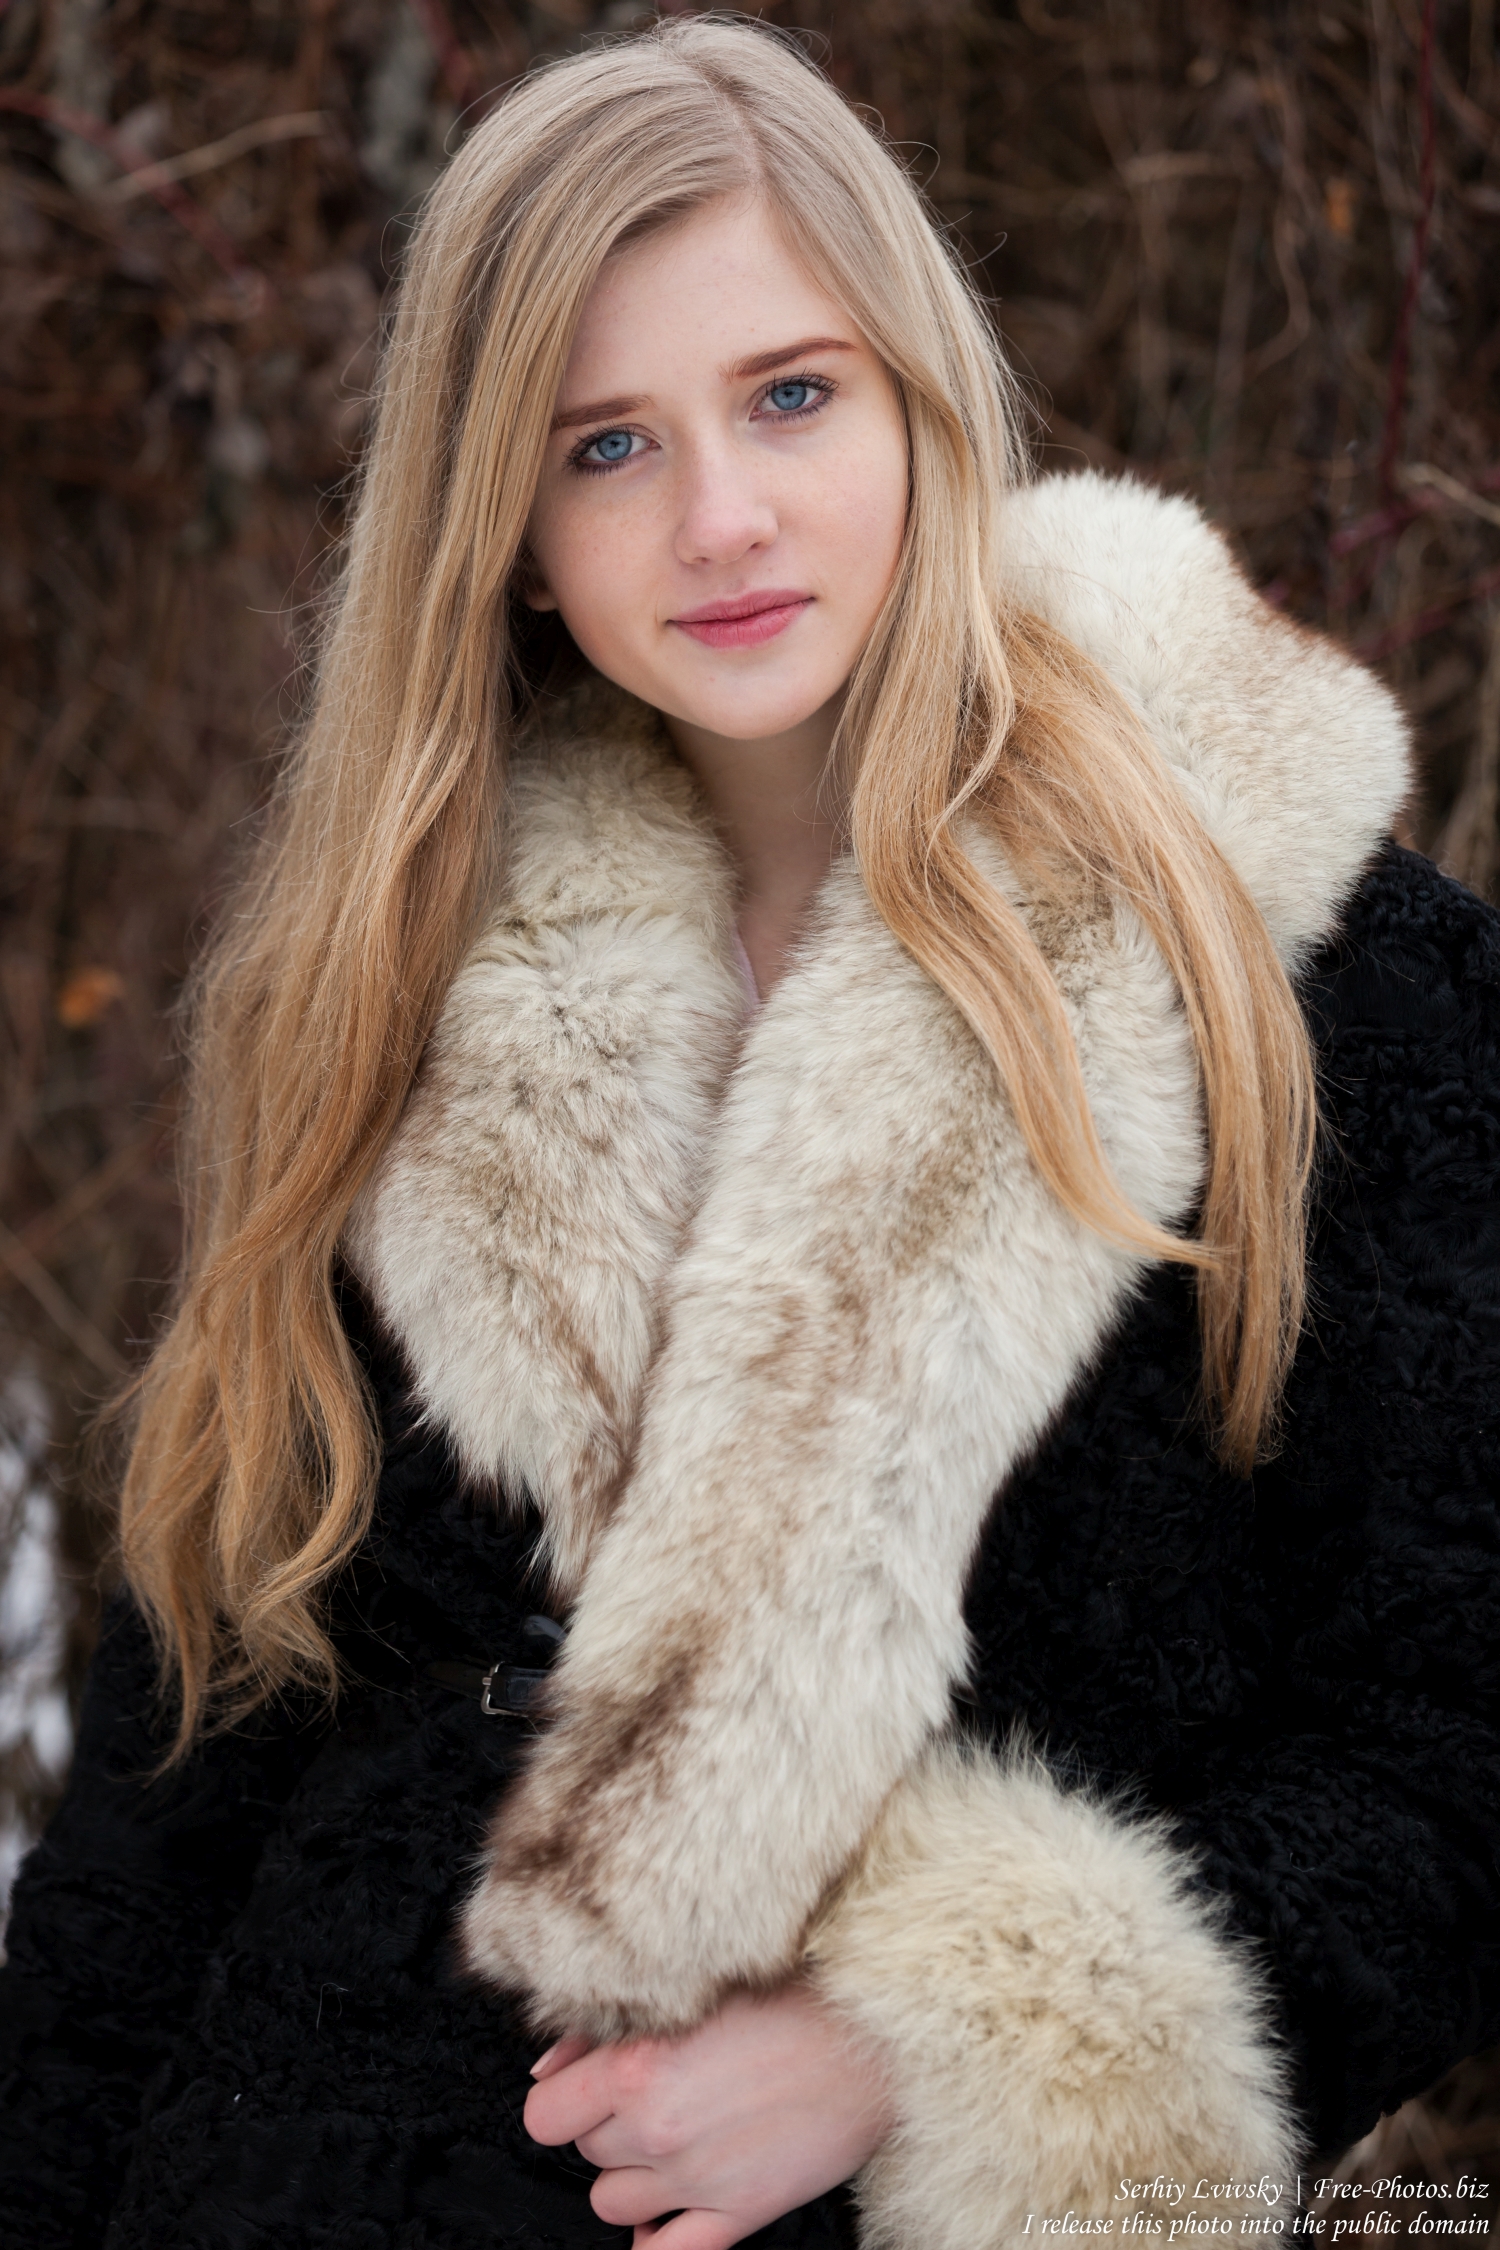 a_natural_blond_17-year-old_girl_photographed_by_serhiy_lvivsky_in_january_2016_13